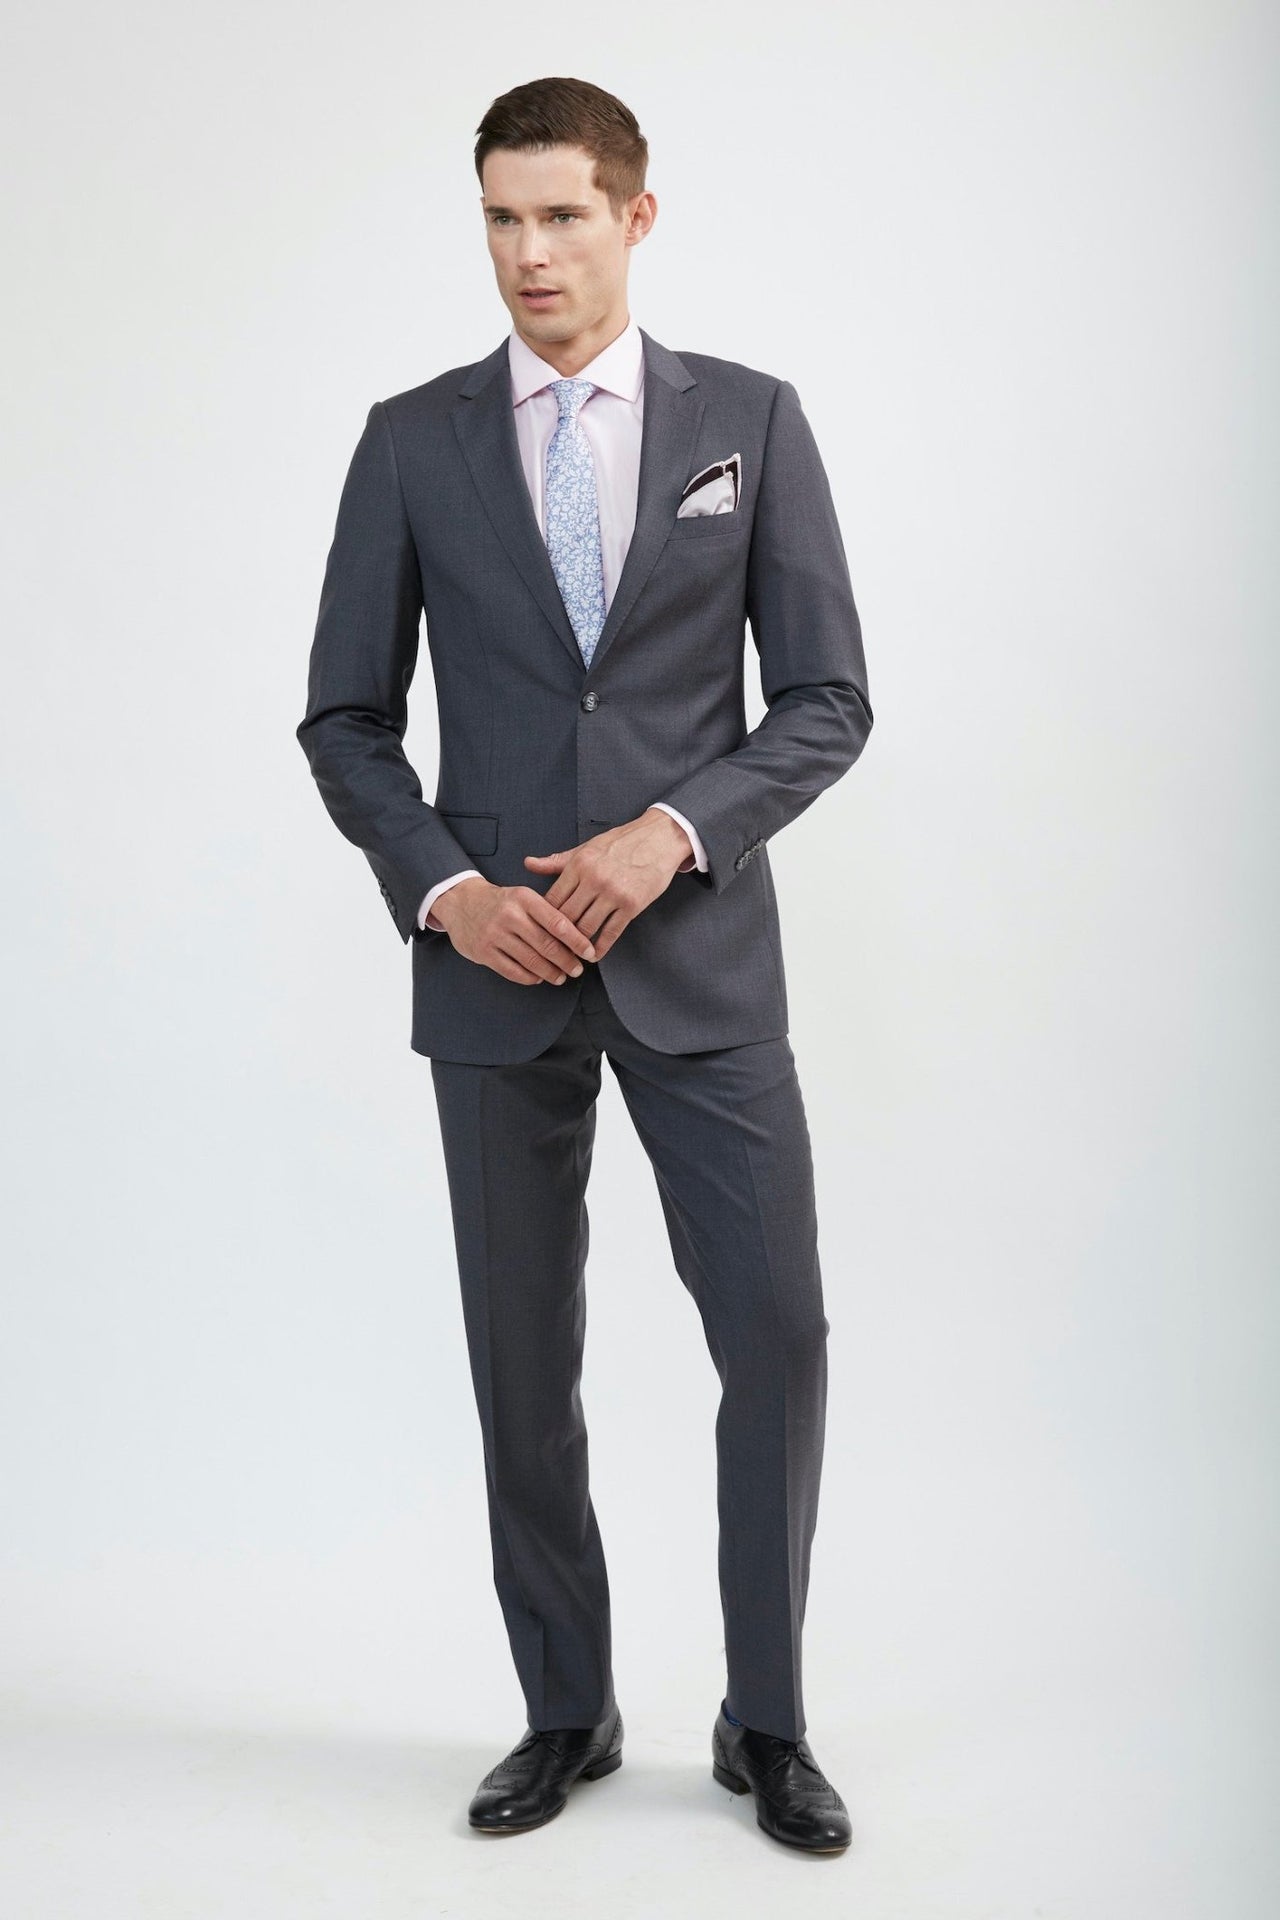 Medium Grey Suit  Buy A Modern Grey Wool Suit For Men From